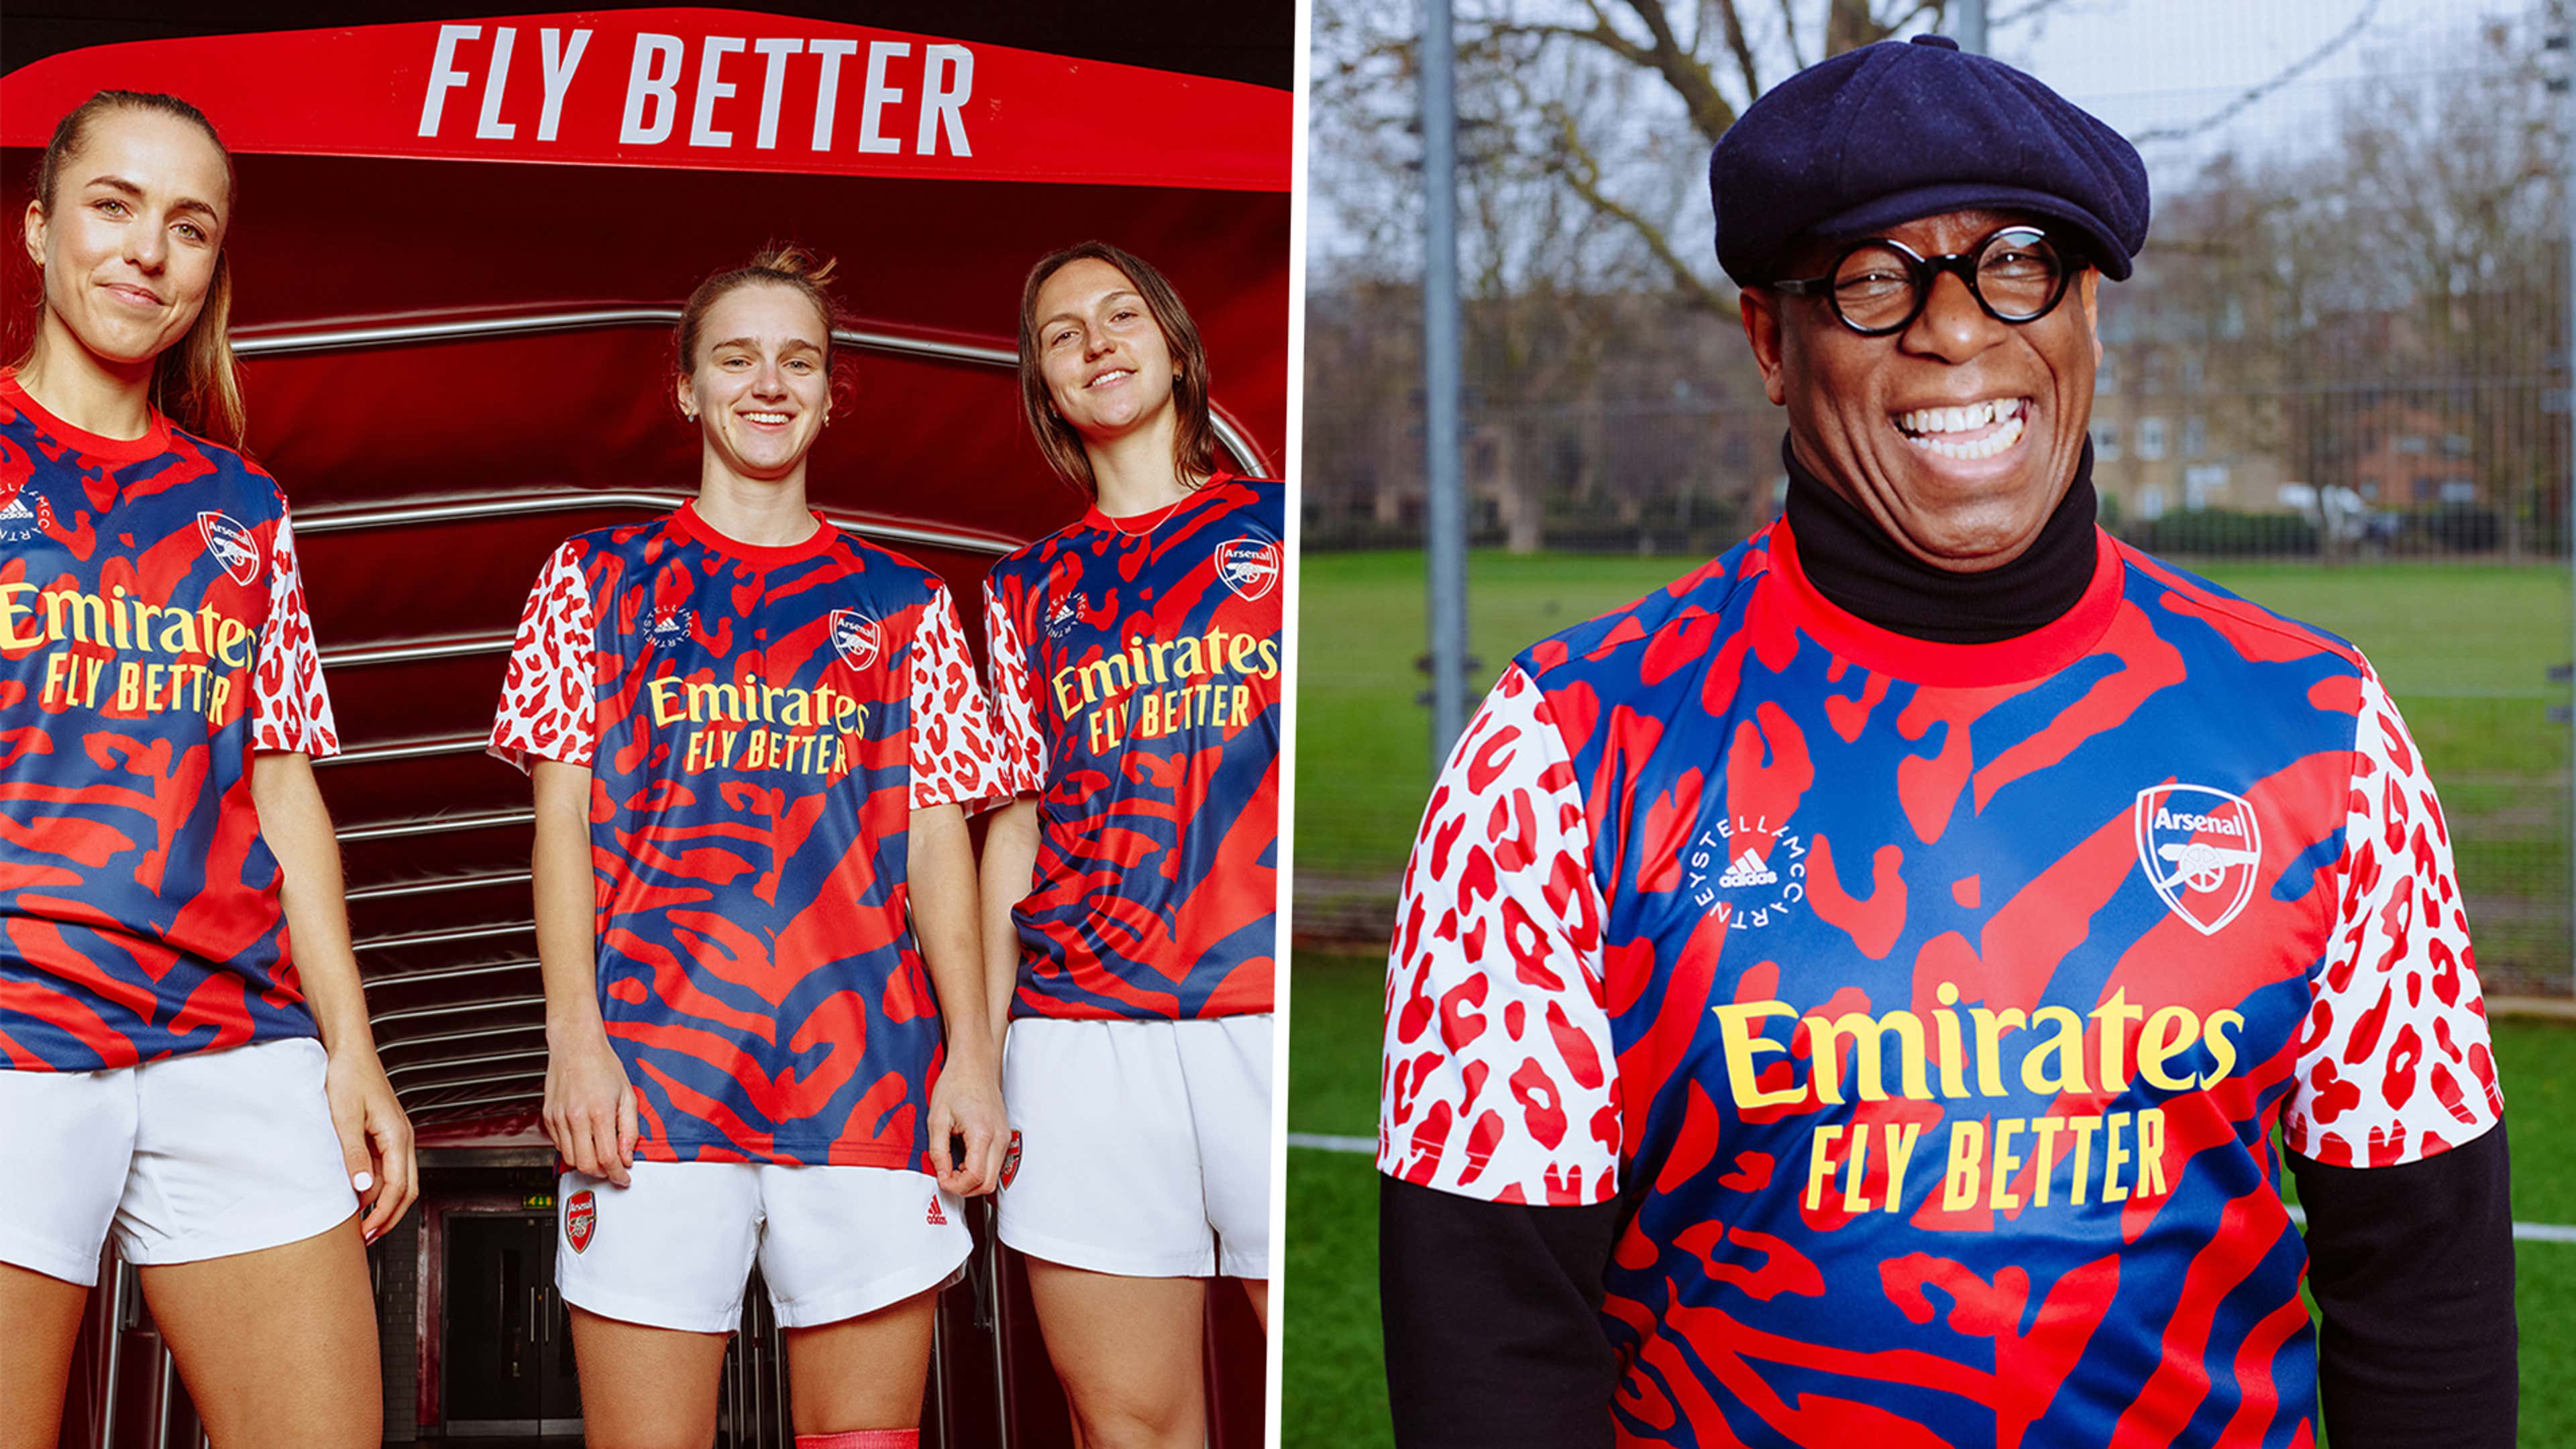 Arsenal Women team up with Adidas by Stella McCartney to release